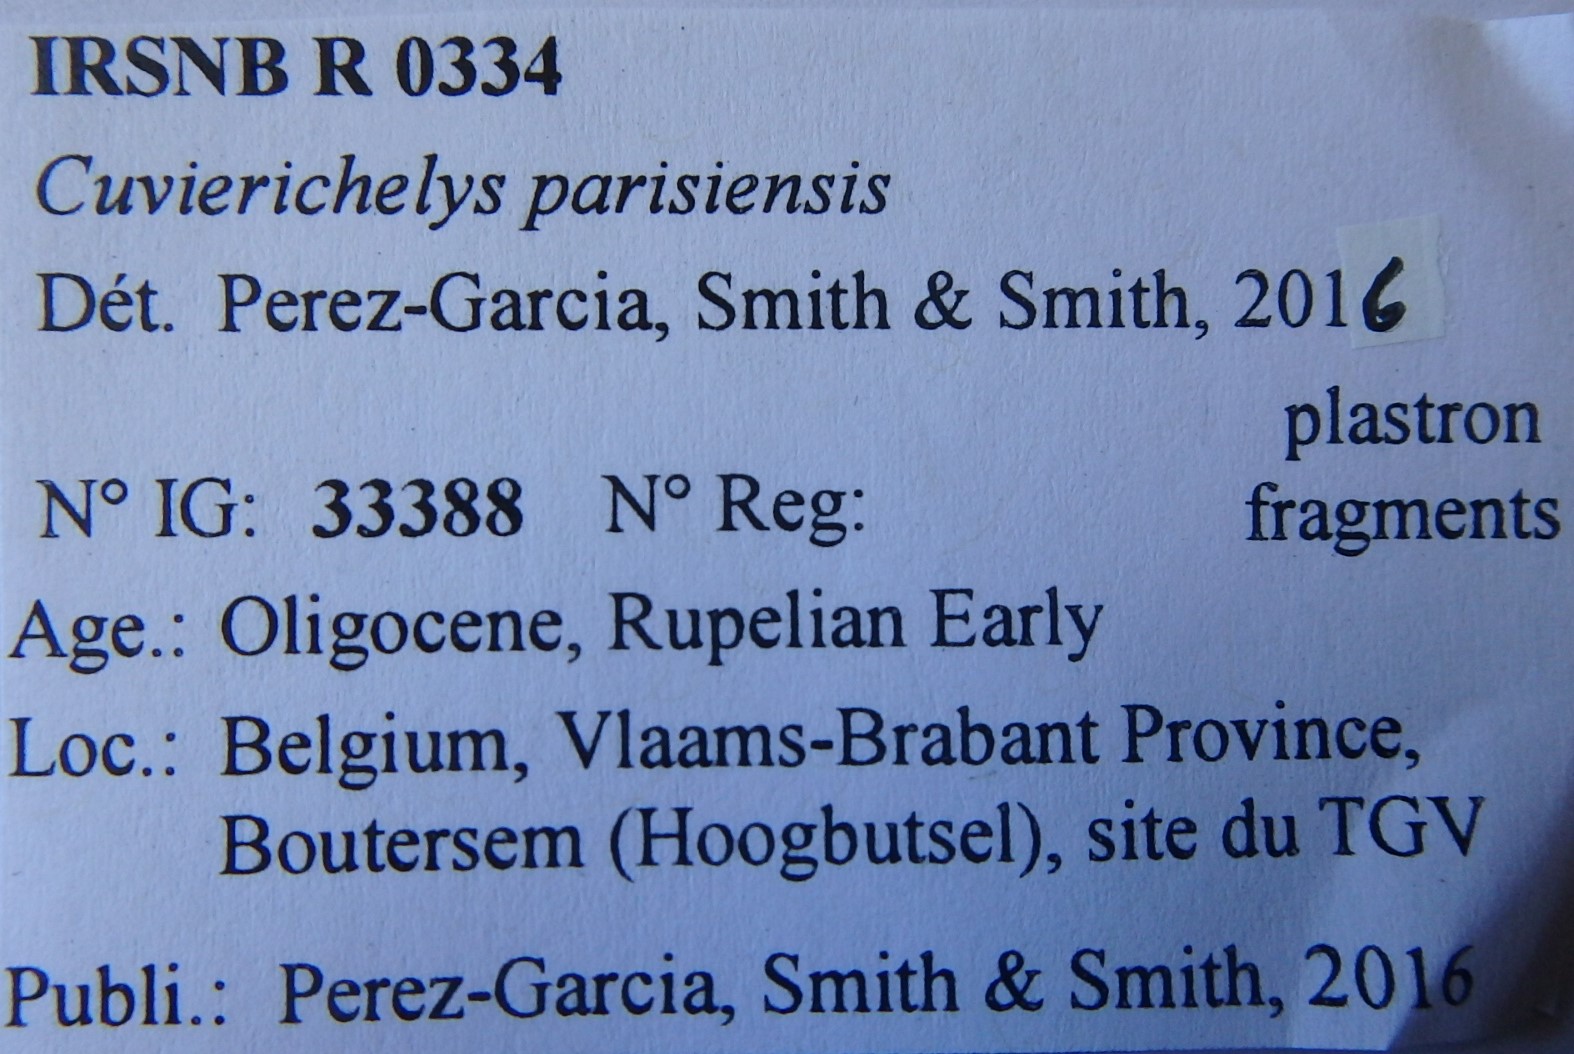 IRSNB R 0334 Labels